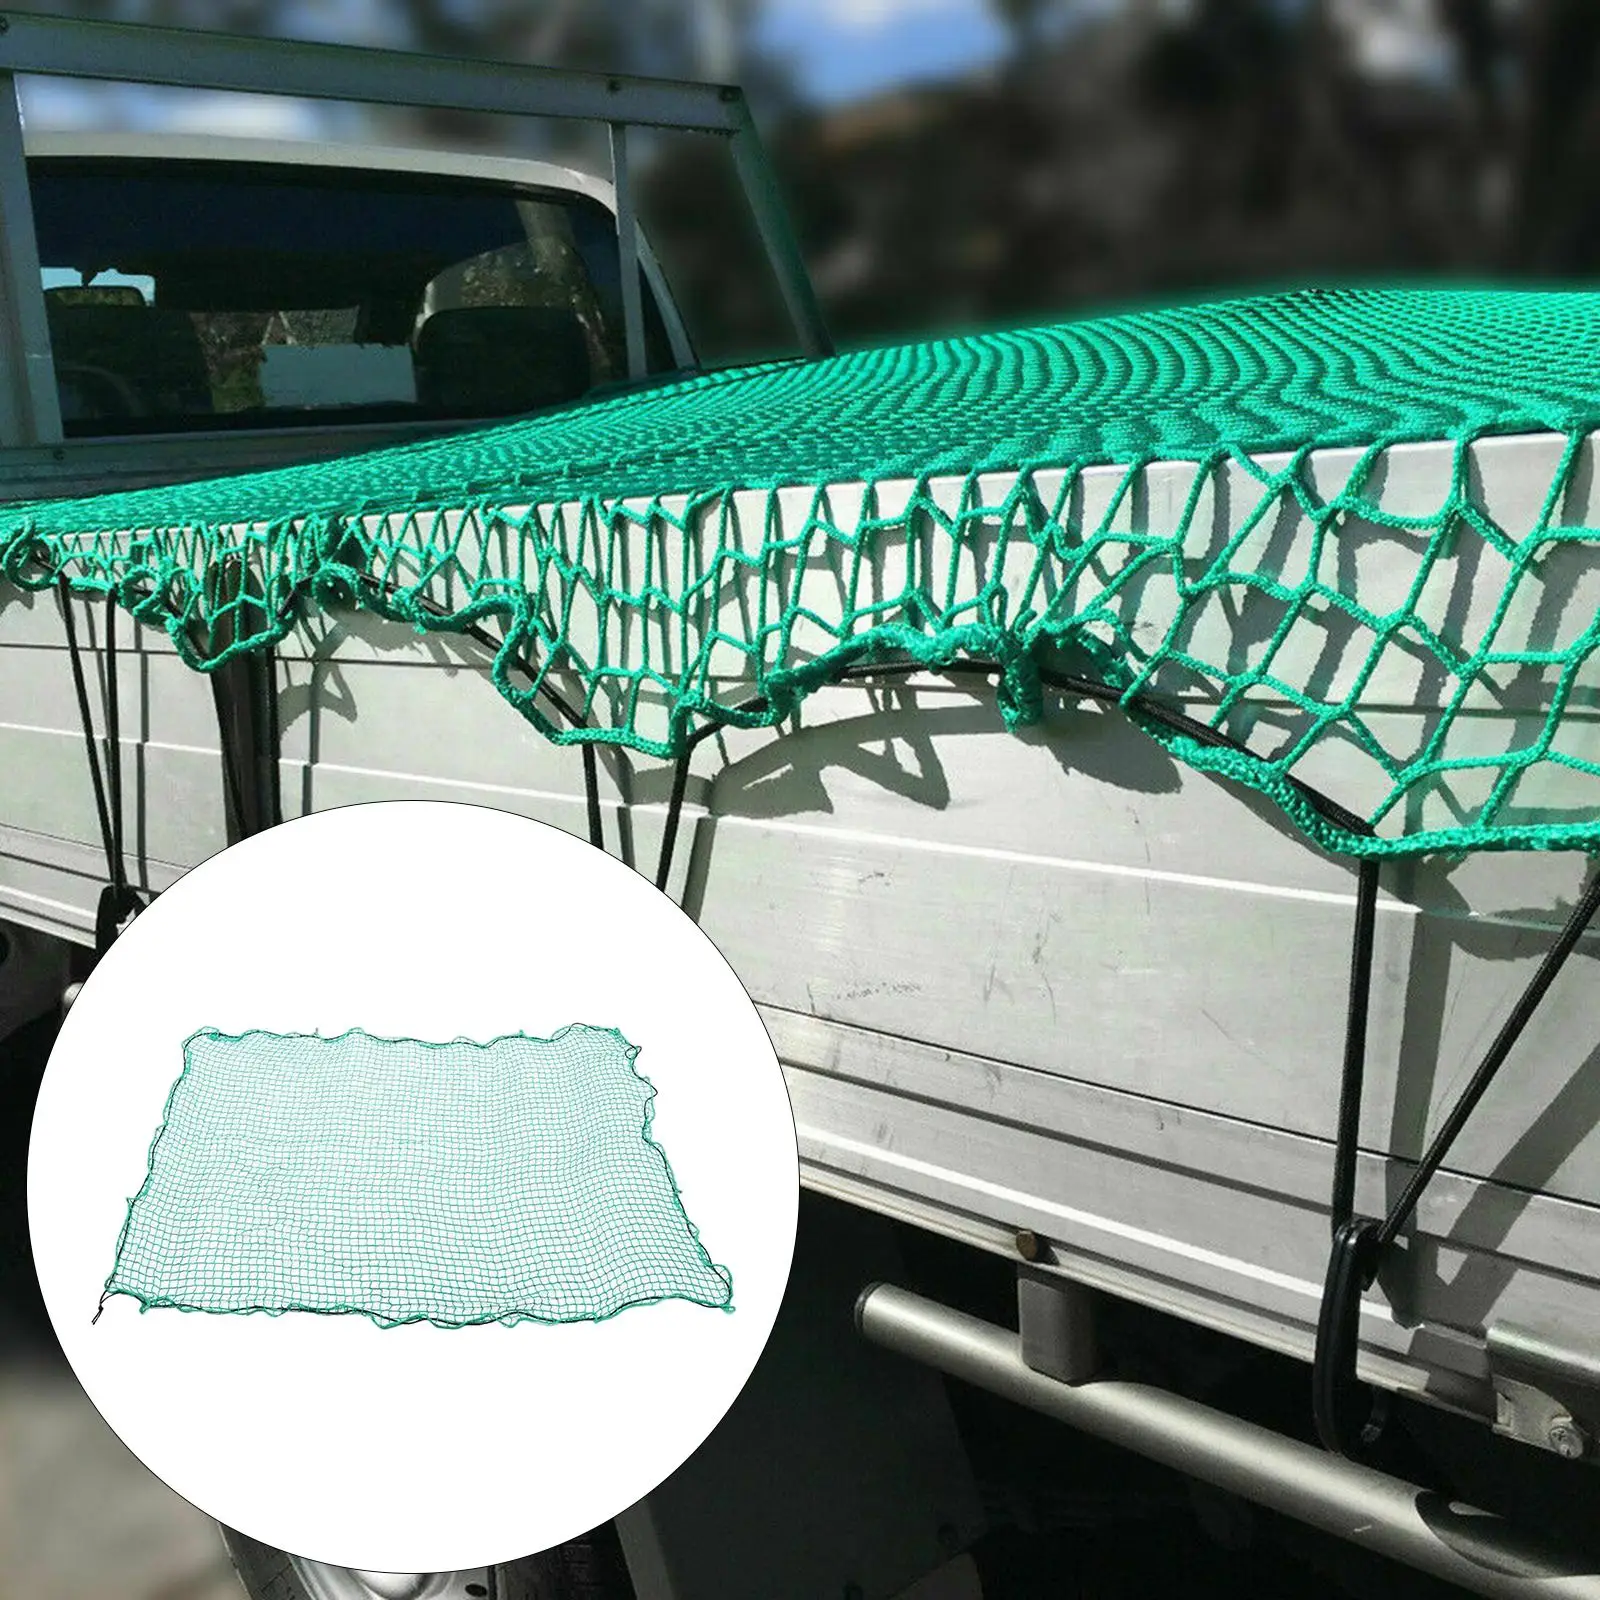 Truck Bed Cargo Net 6.5` x 9.8` Pickup Small Mesh Holes Stretchable Bungee Cargo Net Car Storage Net for SUV Car Truck Bed